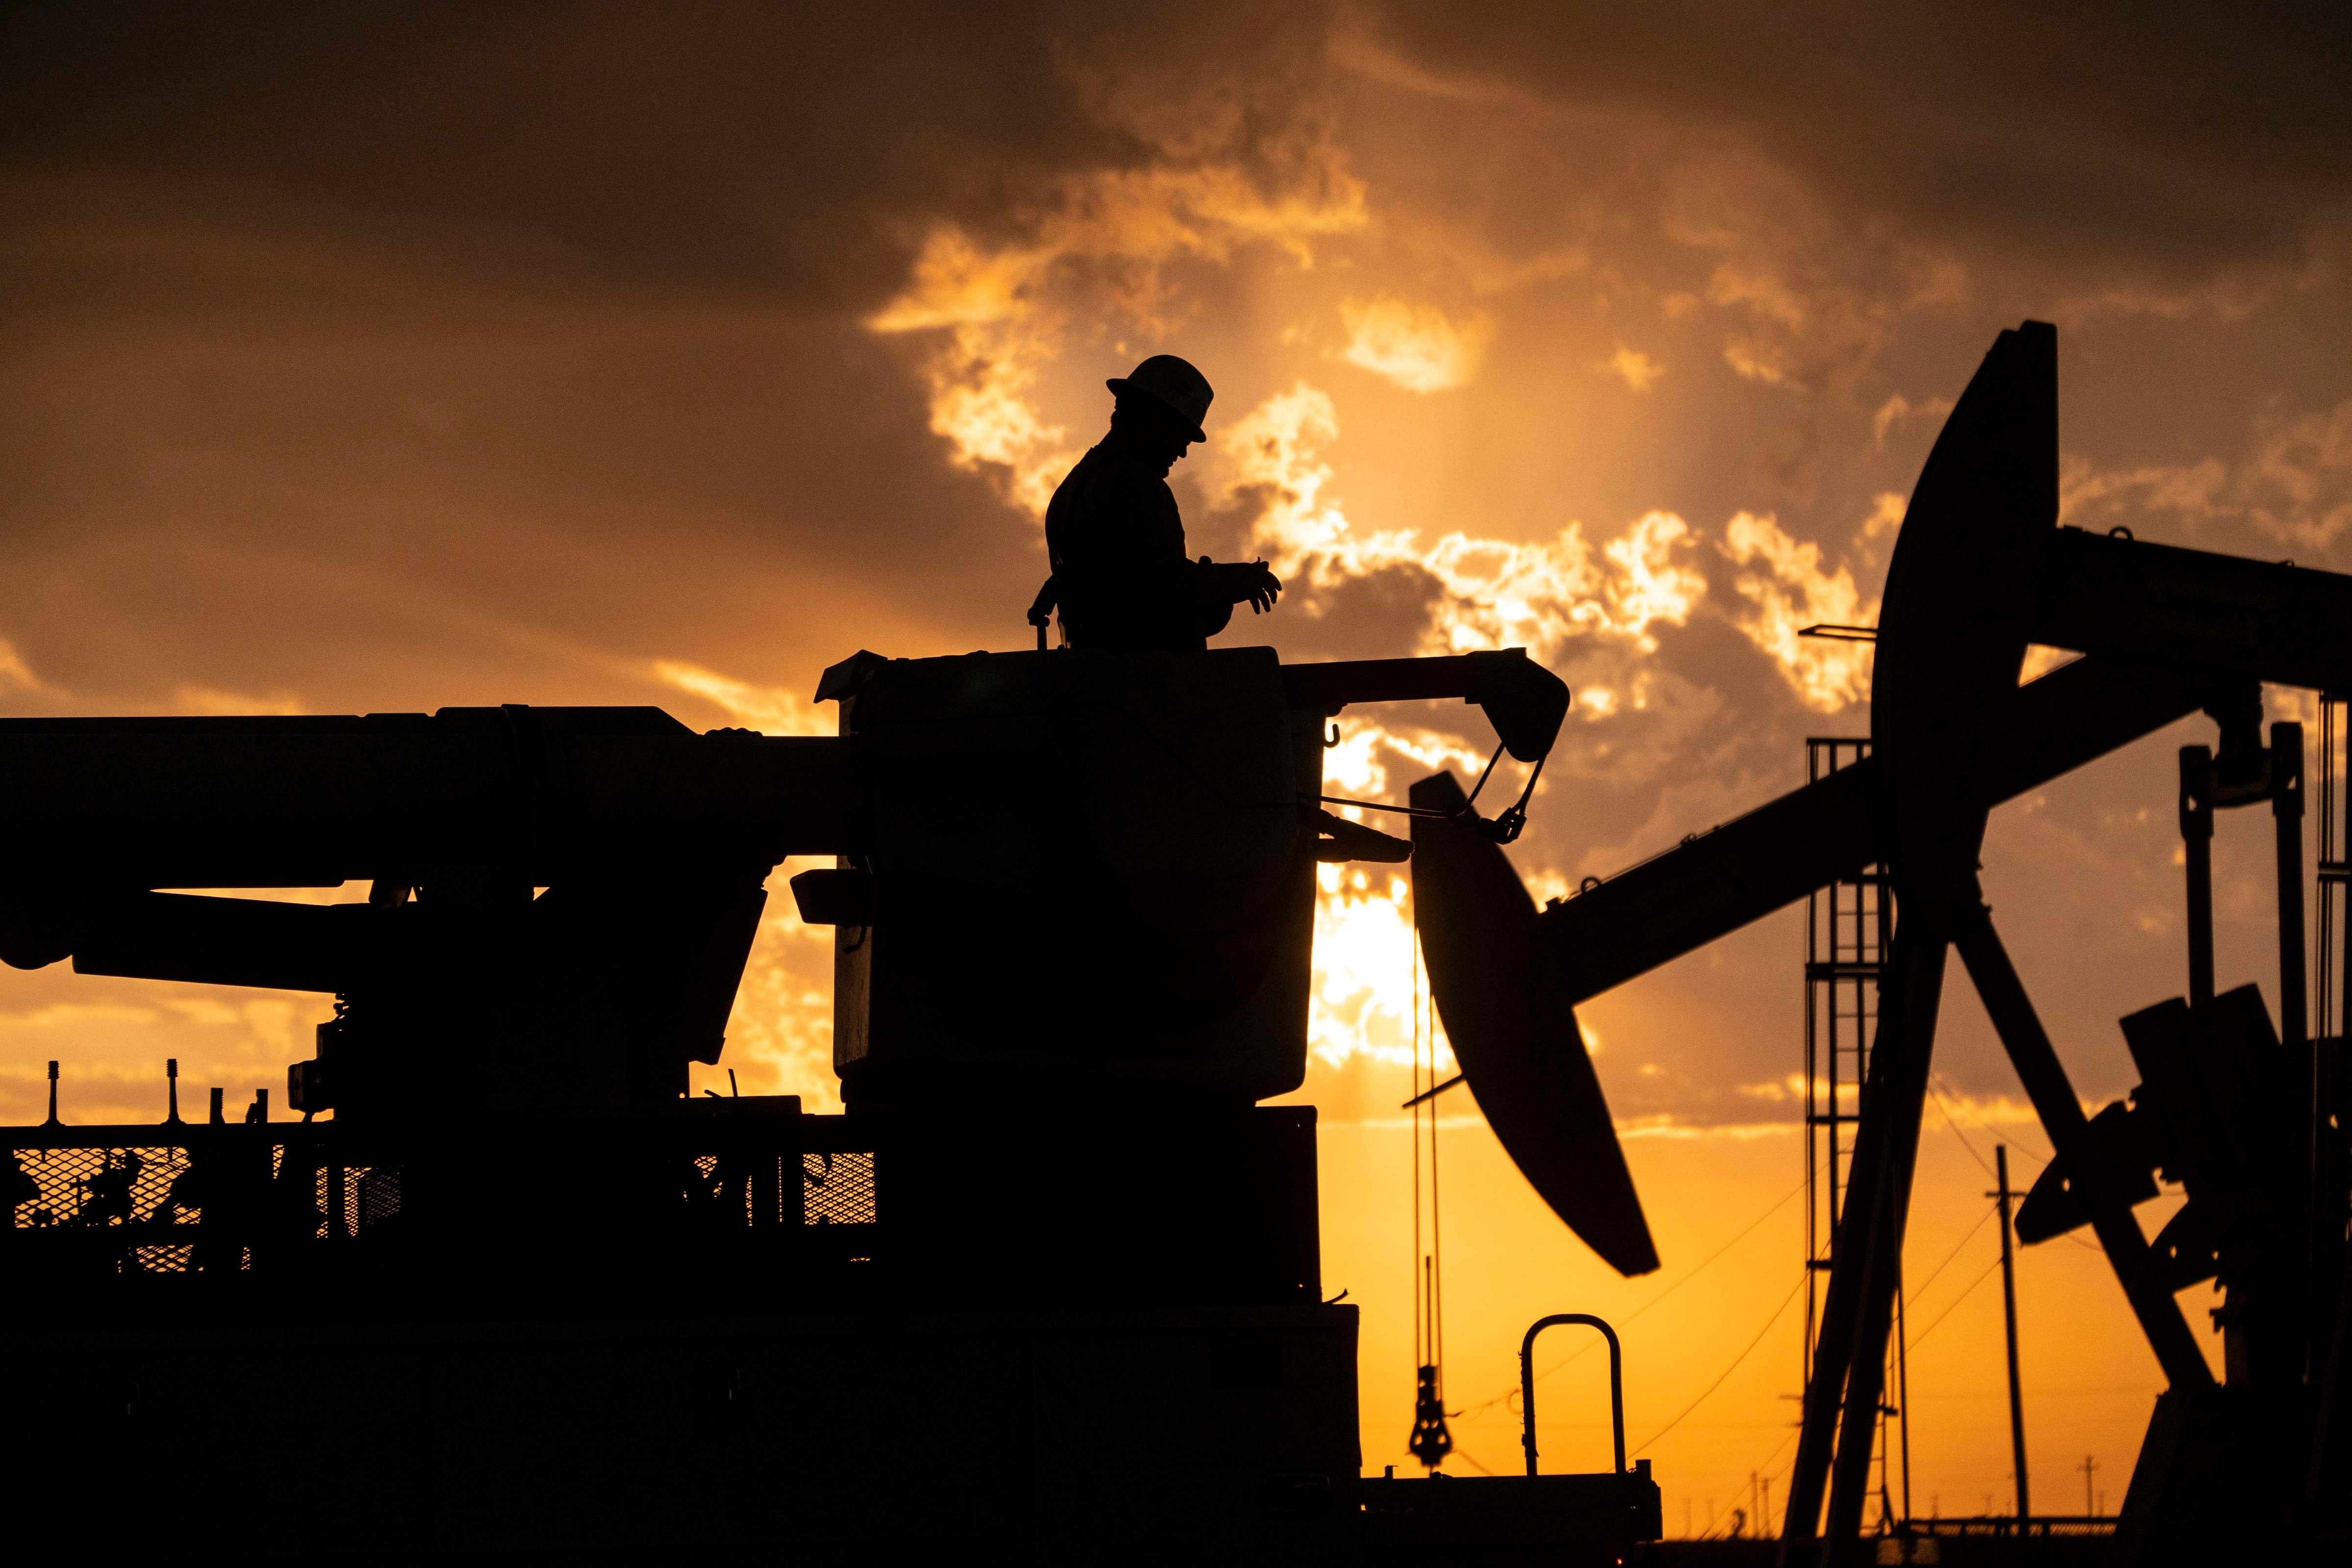 Captivating Golden Sunset with Silhouette of Dedicated Oncor Lineman at Work in the Oilfield